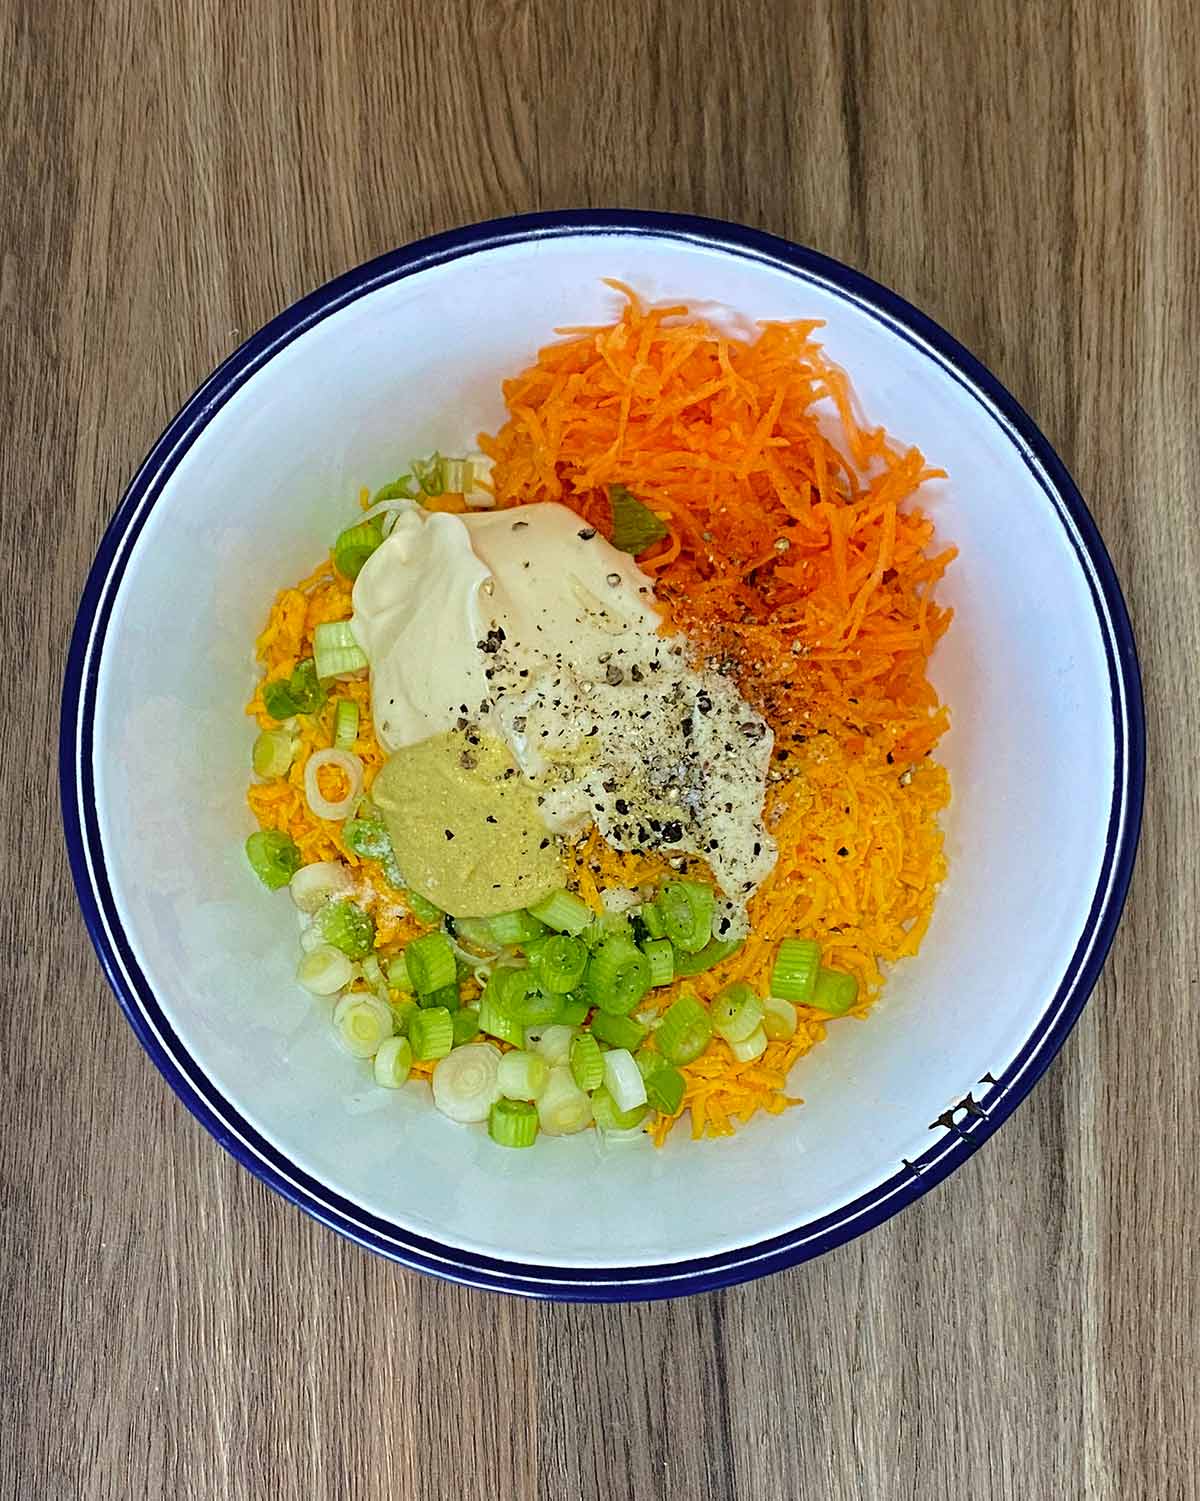 Grated cheese, carrot, spring onions, mayo, mustard and seasoning in a mixing bowl.